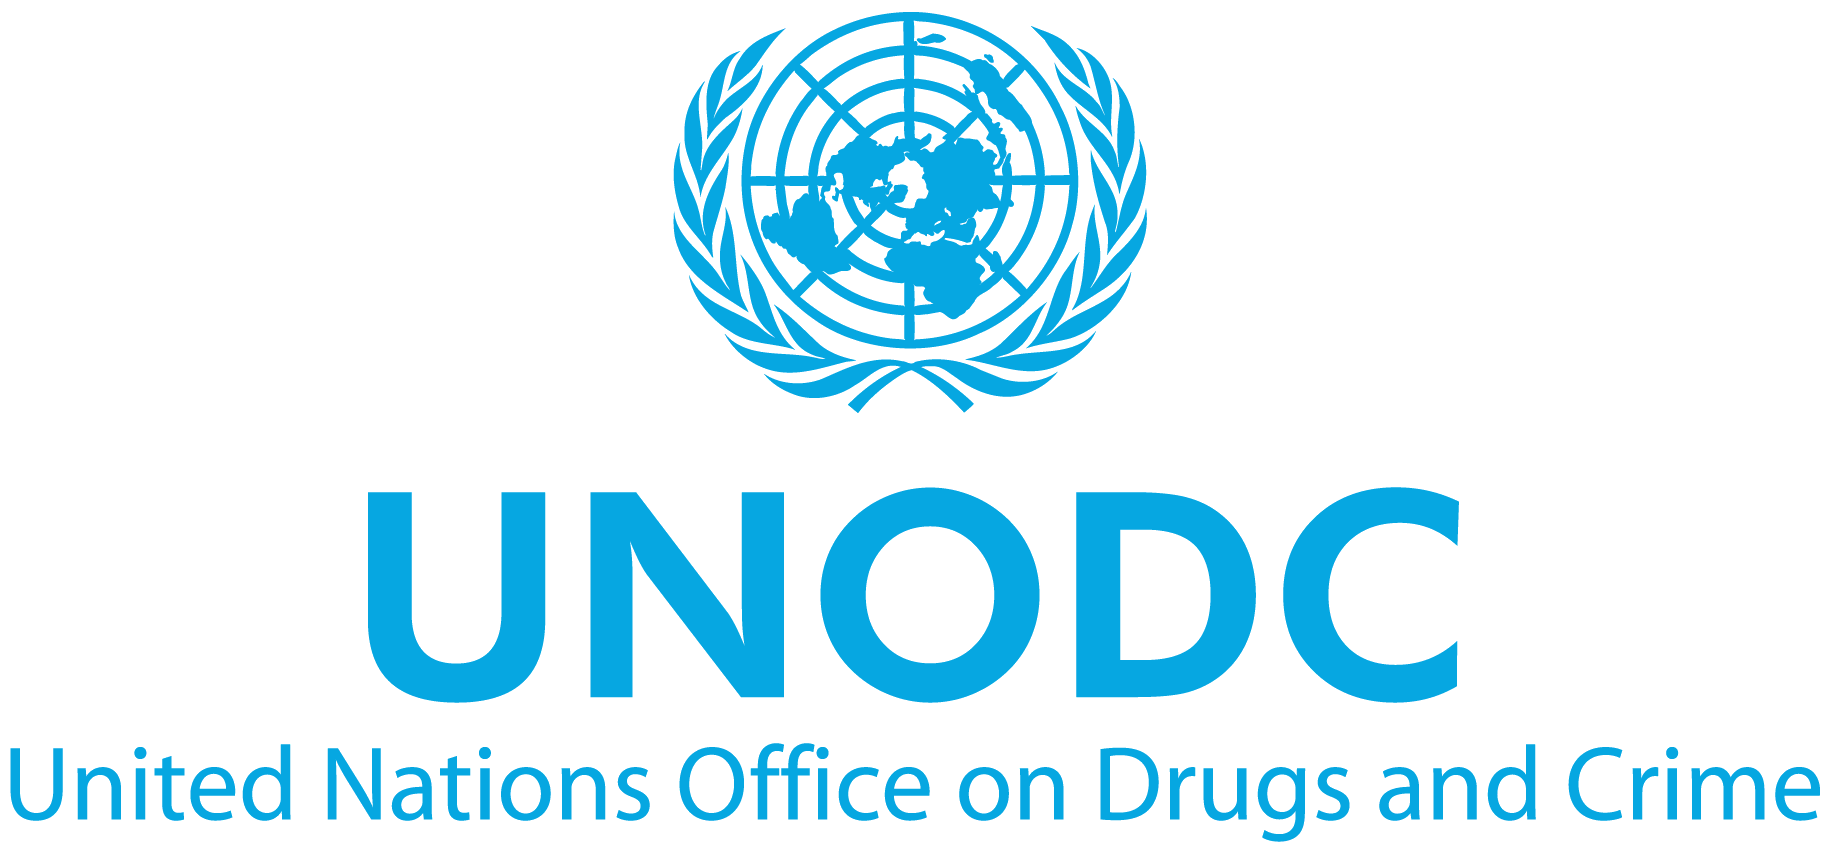 United Nations Office on Drugs and Crime | End Violence